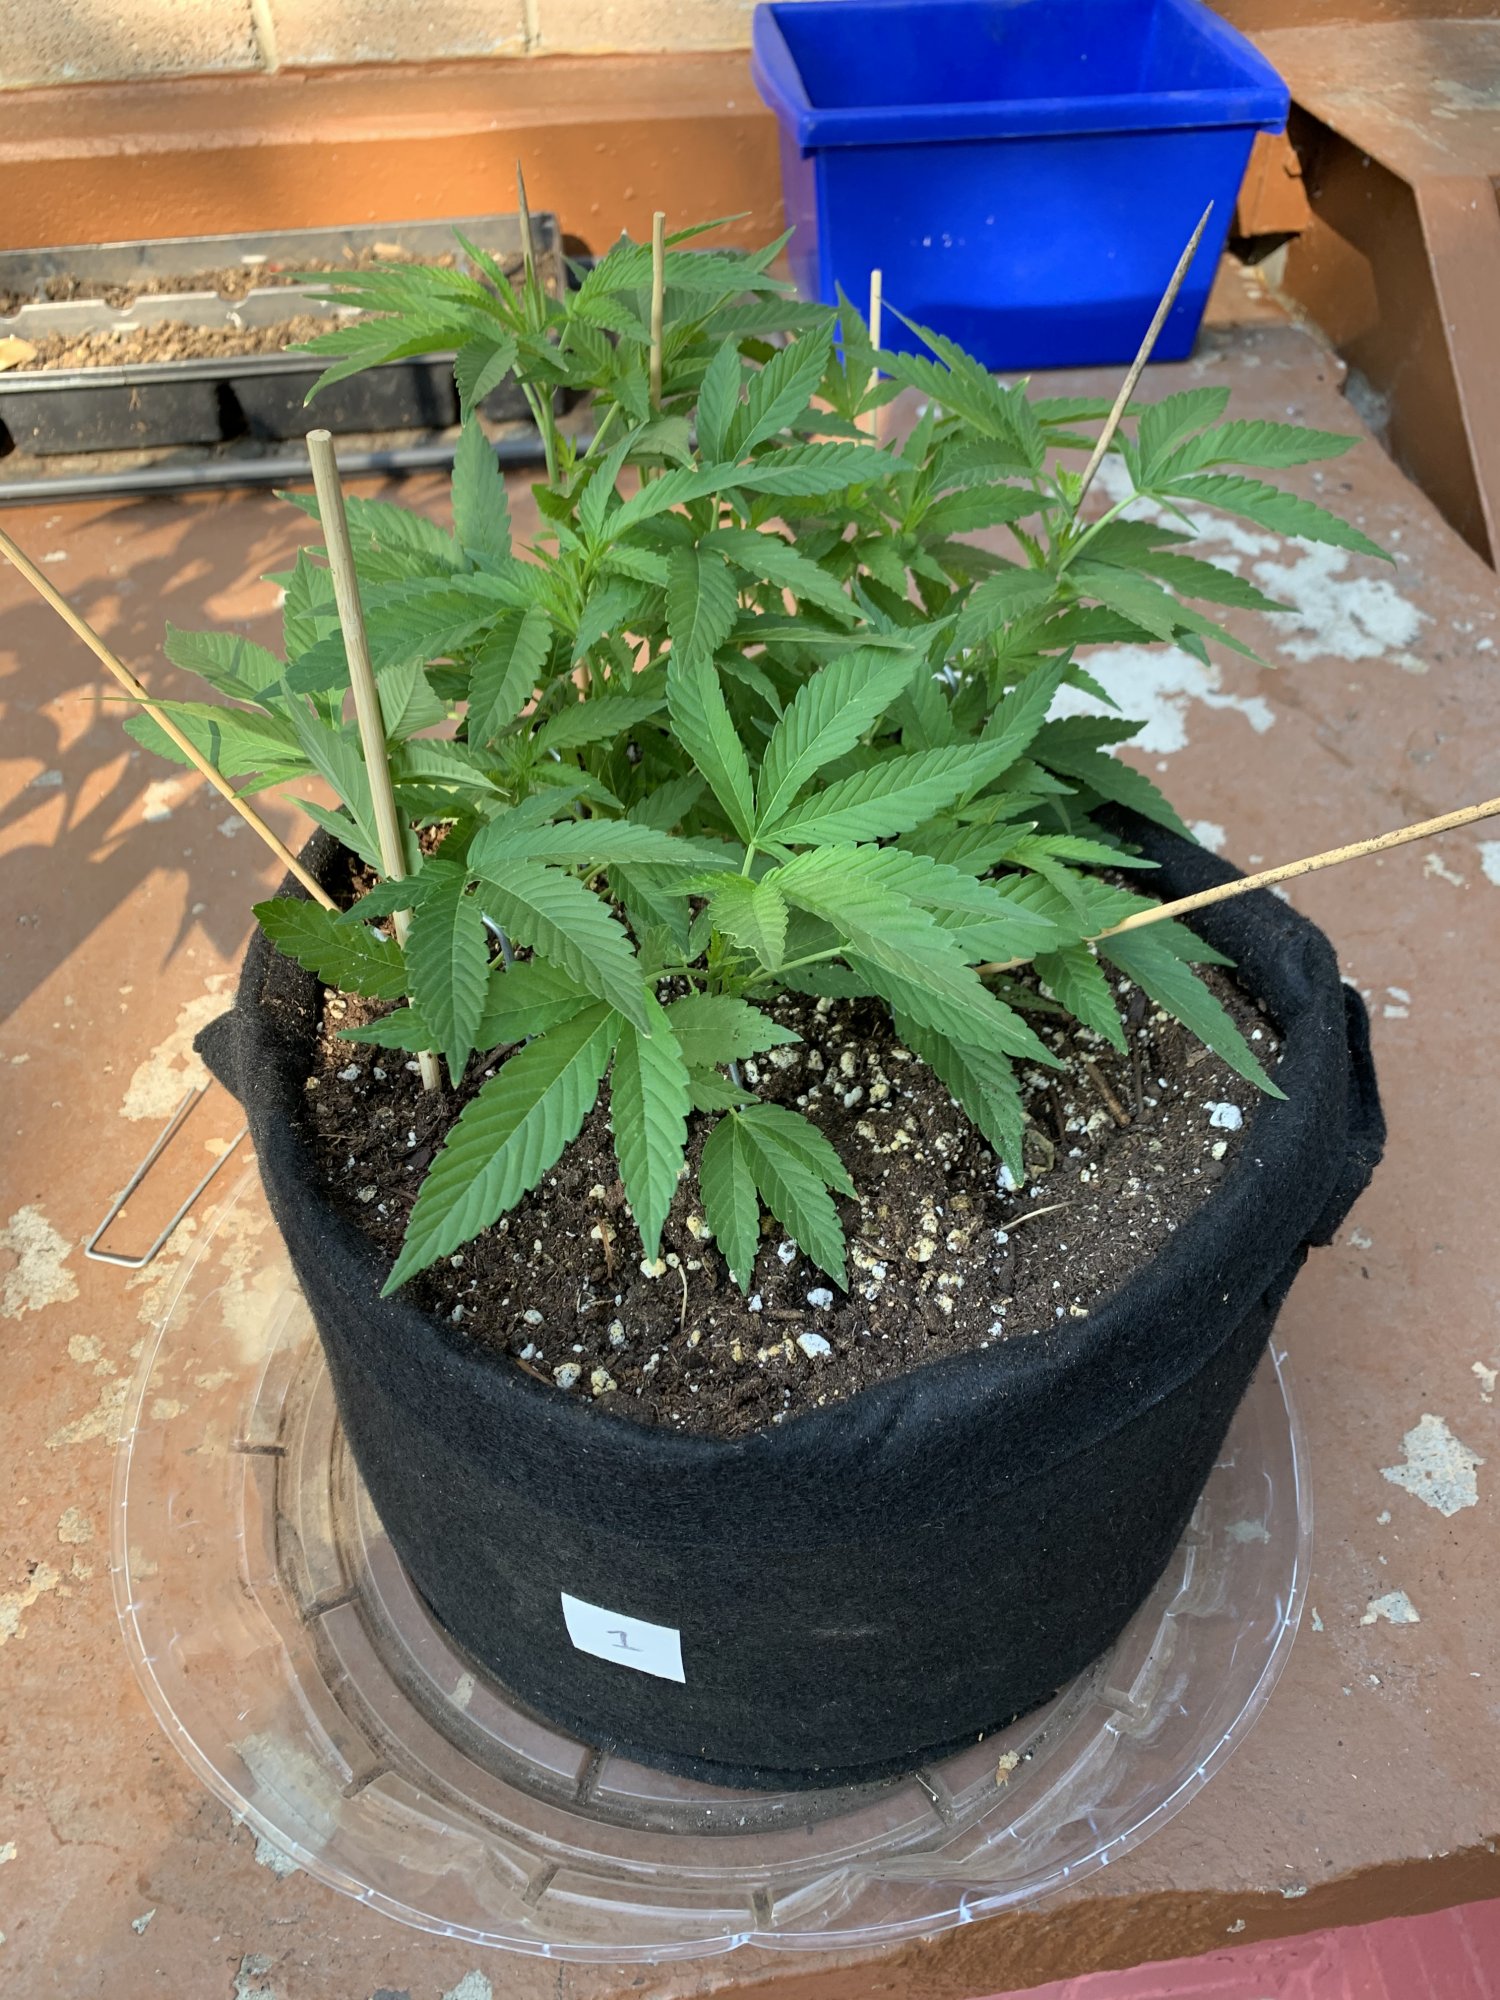 New grower looking for advice on my pink kush clones